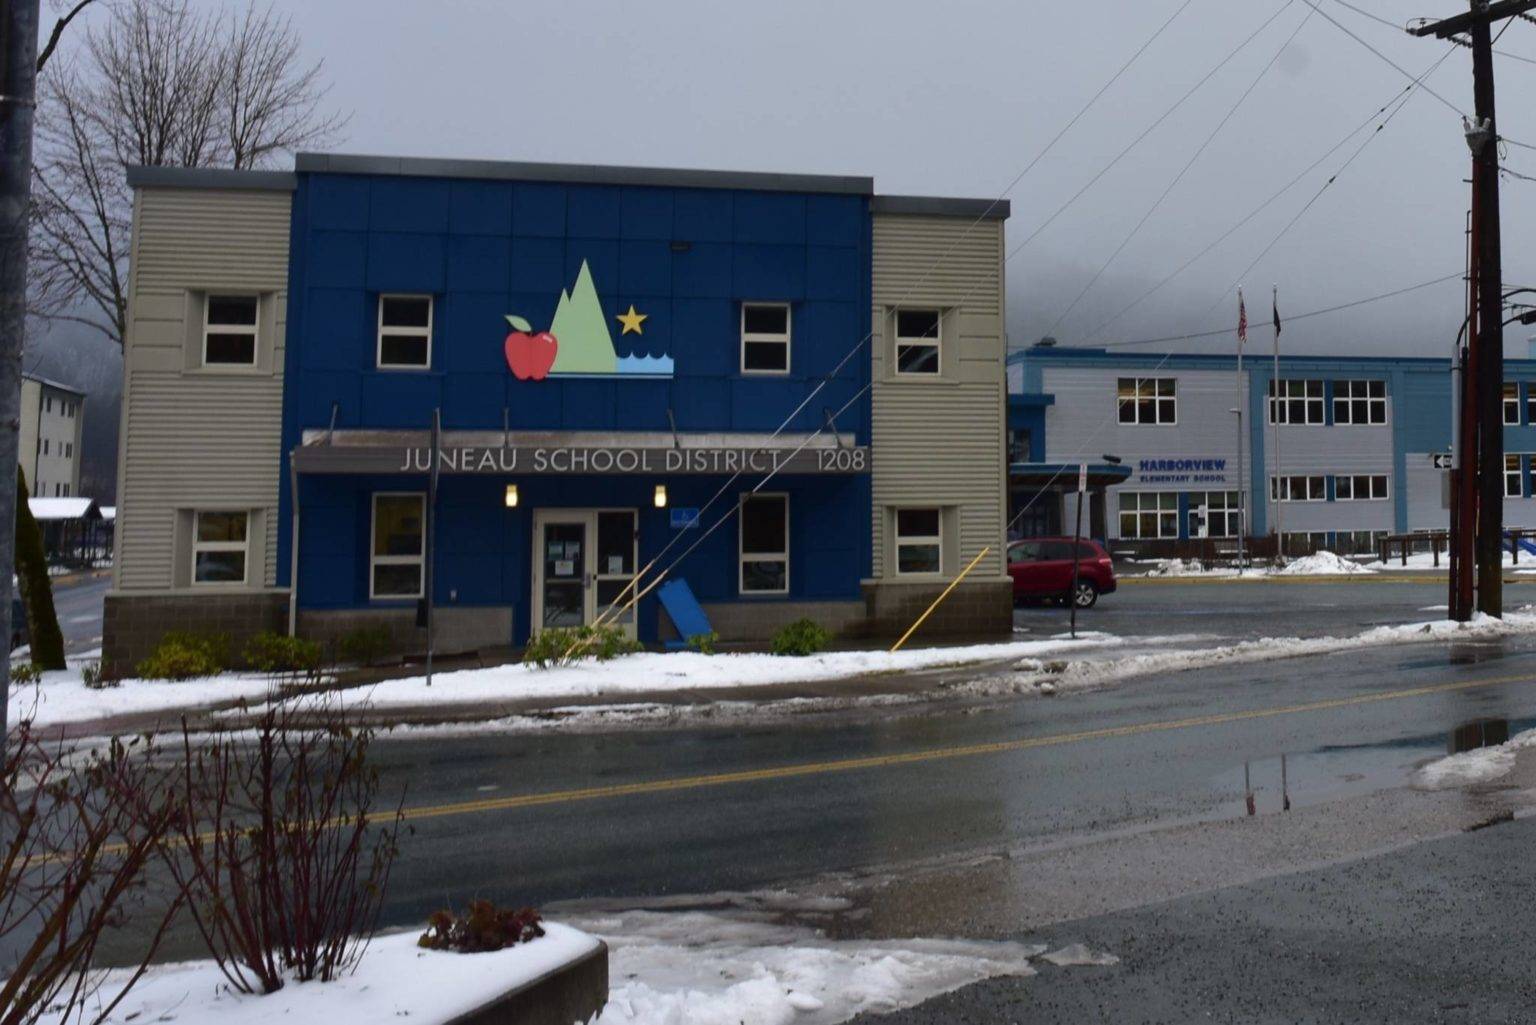 The Juneau School District building and Harborview Elementary School on Monday, Nov. 9, 2020. The district's funding is stable for this year according to the Board of Education, but next year's budget depends on the Legislature. (Peter Segall / Juneau Empire)